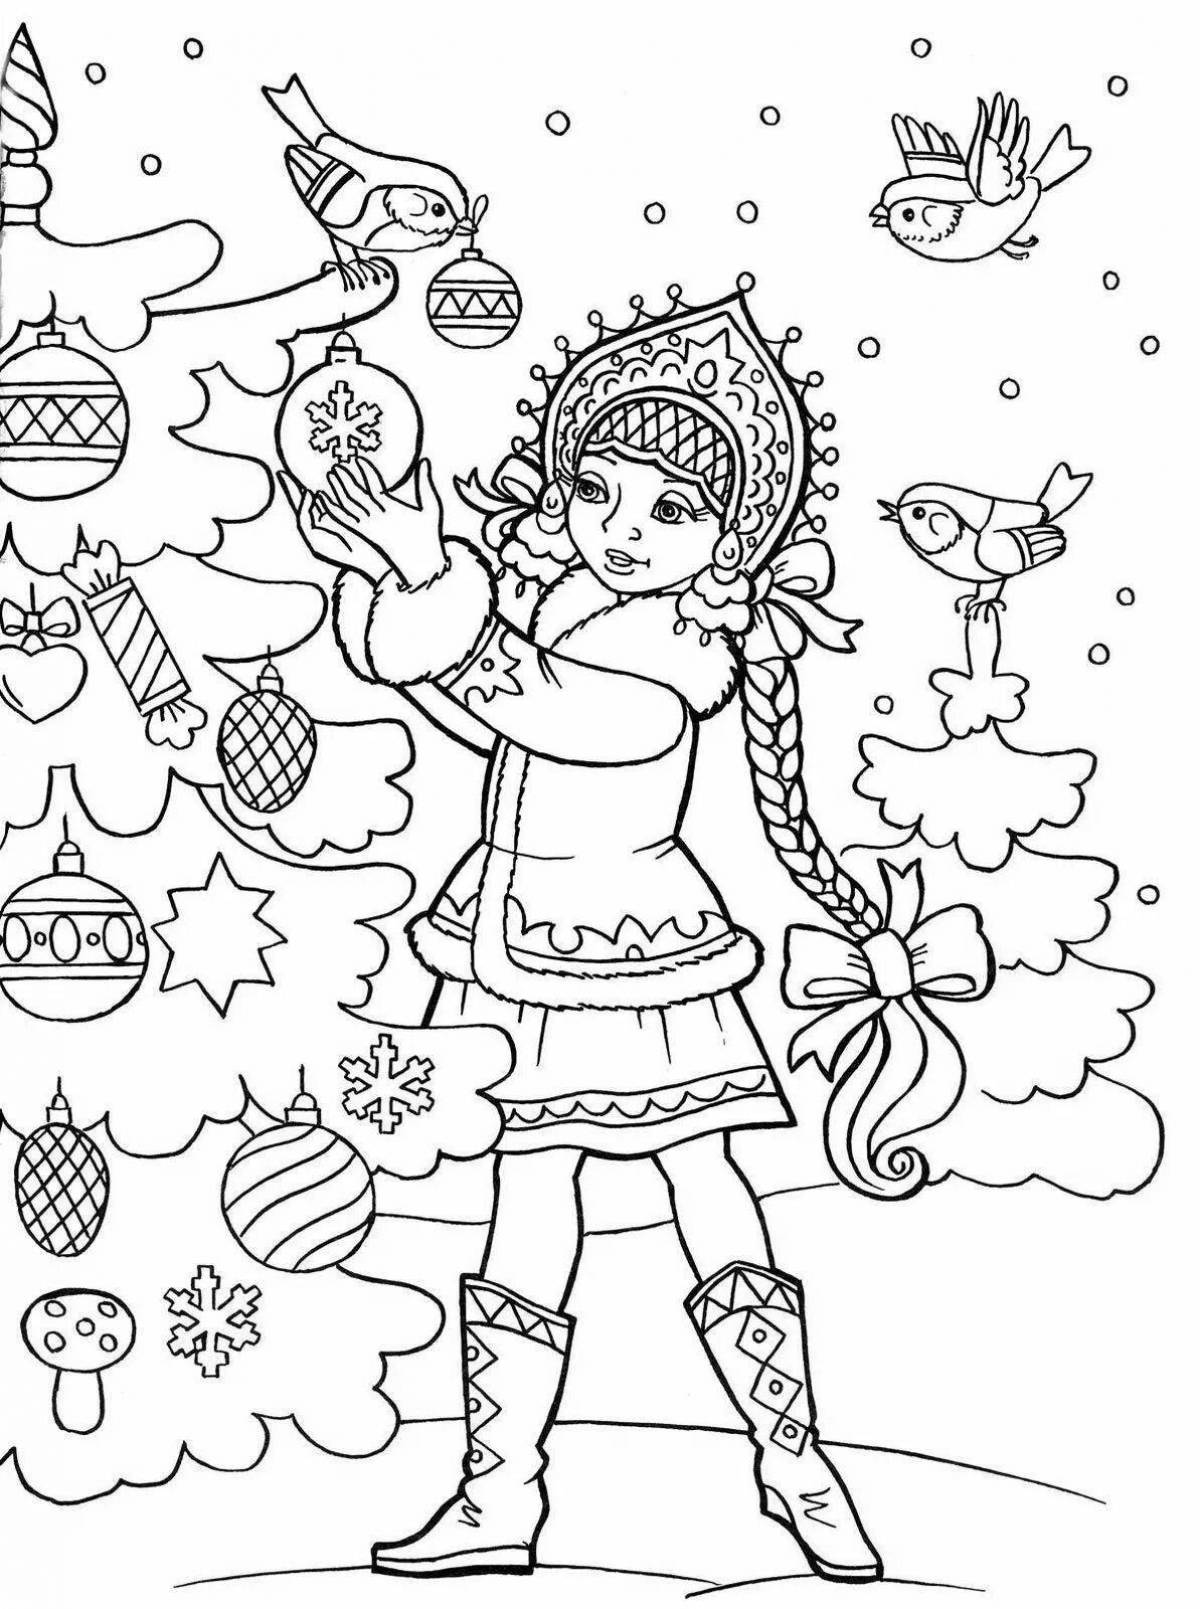 Children's Snow Maiden coloring book for kids